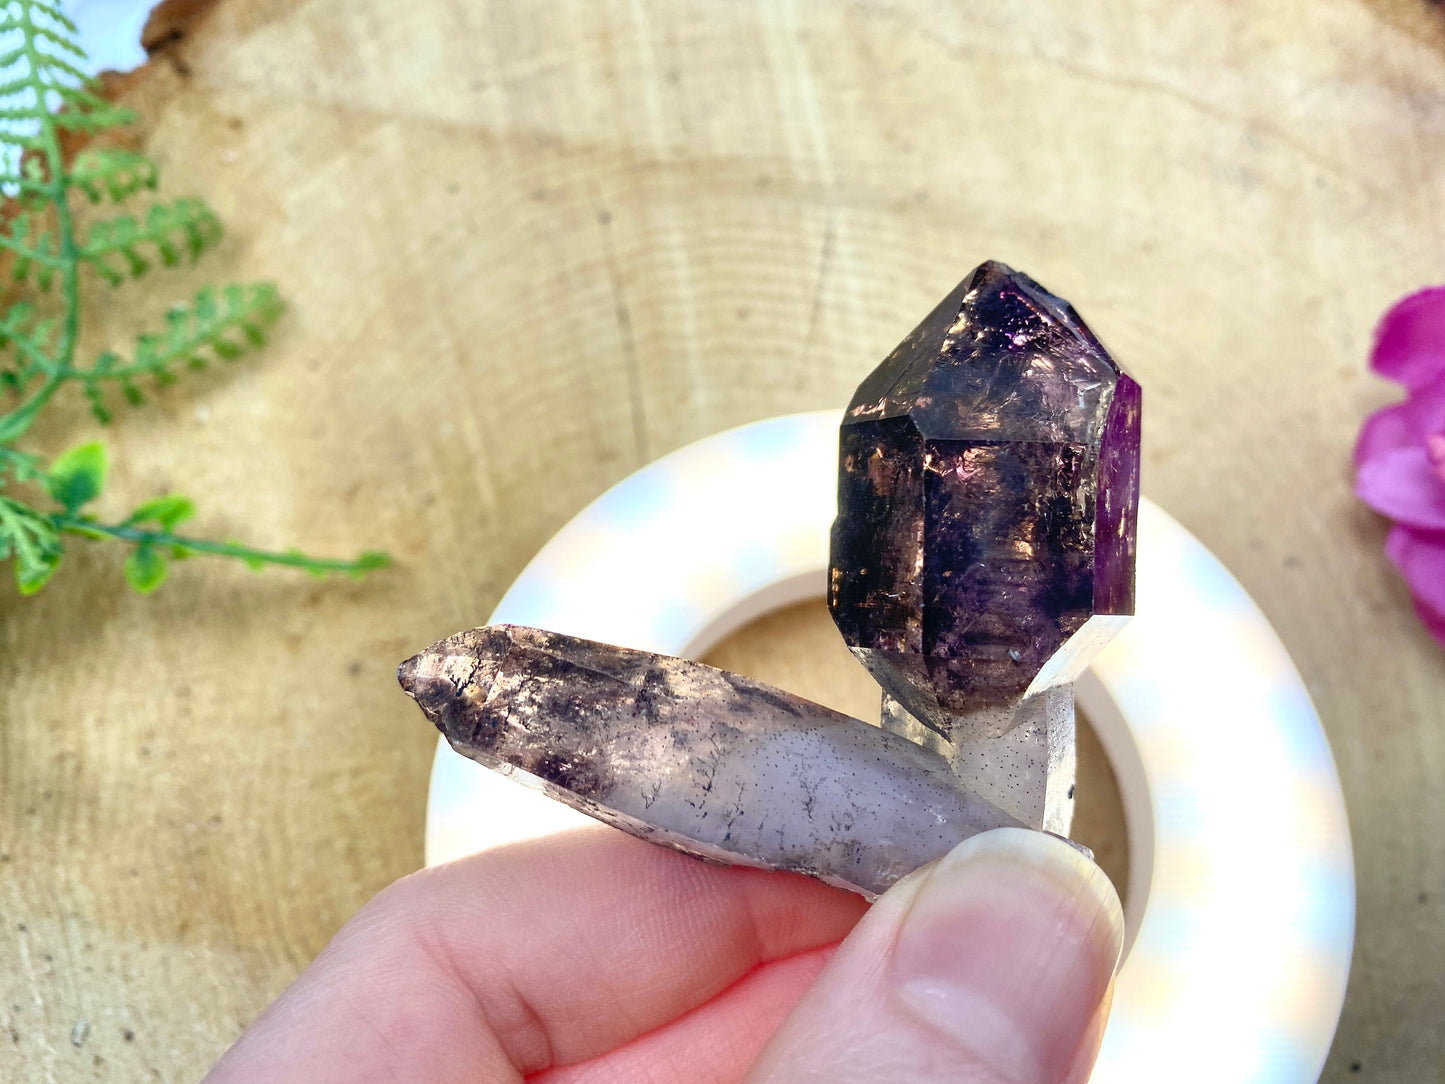 Shangaan Amethyst Scepter with Twin- Smoky Amethyst Cluster from Zimbabwe